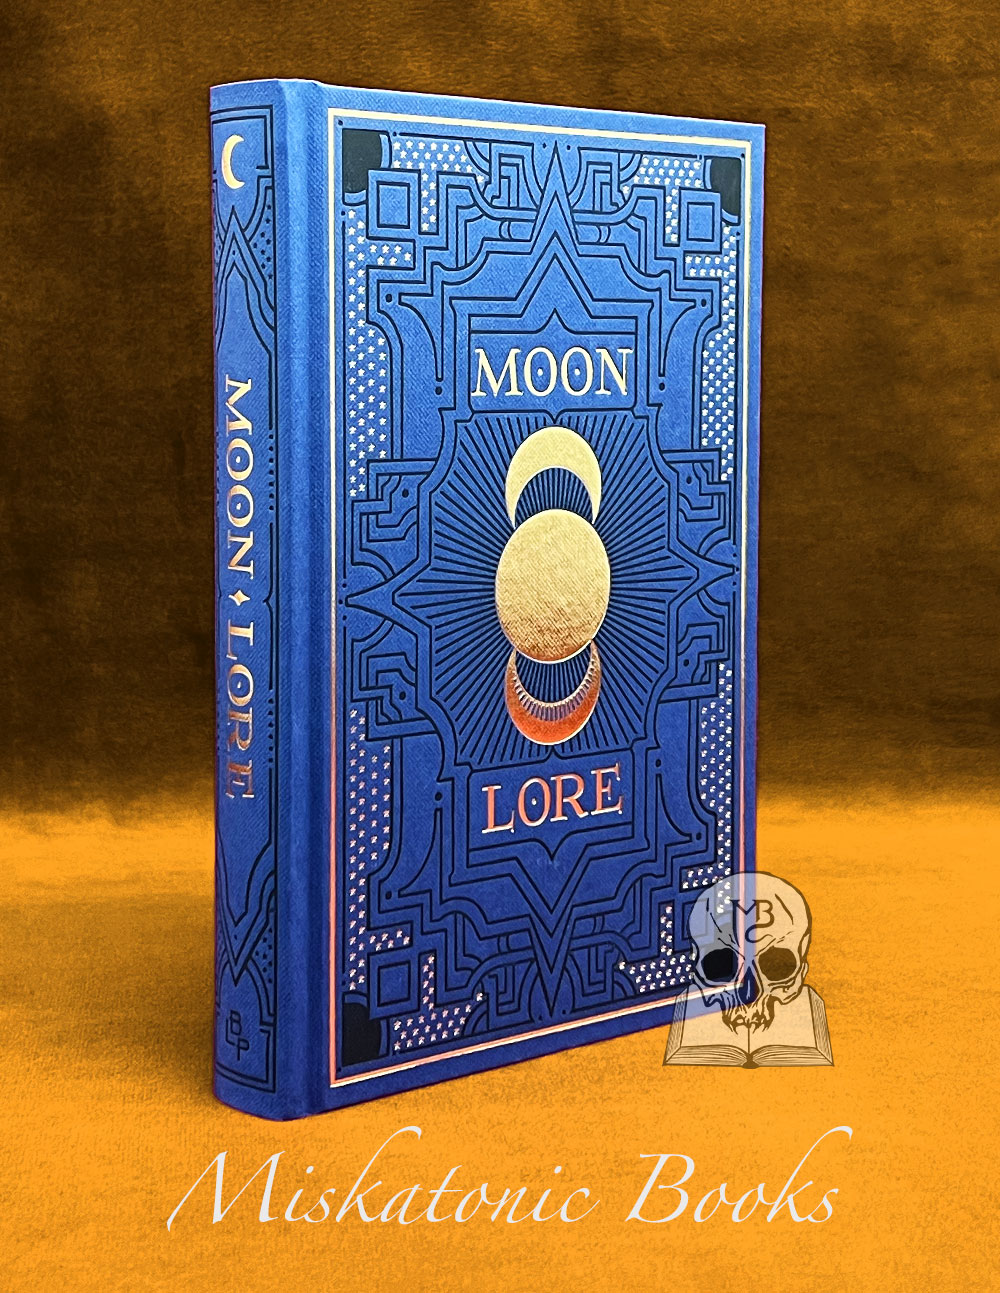 MOON LORE by Timothy Harley - (Hardcover Edition)